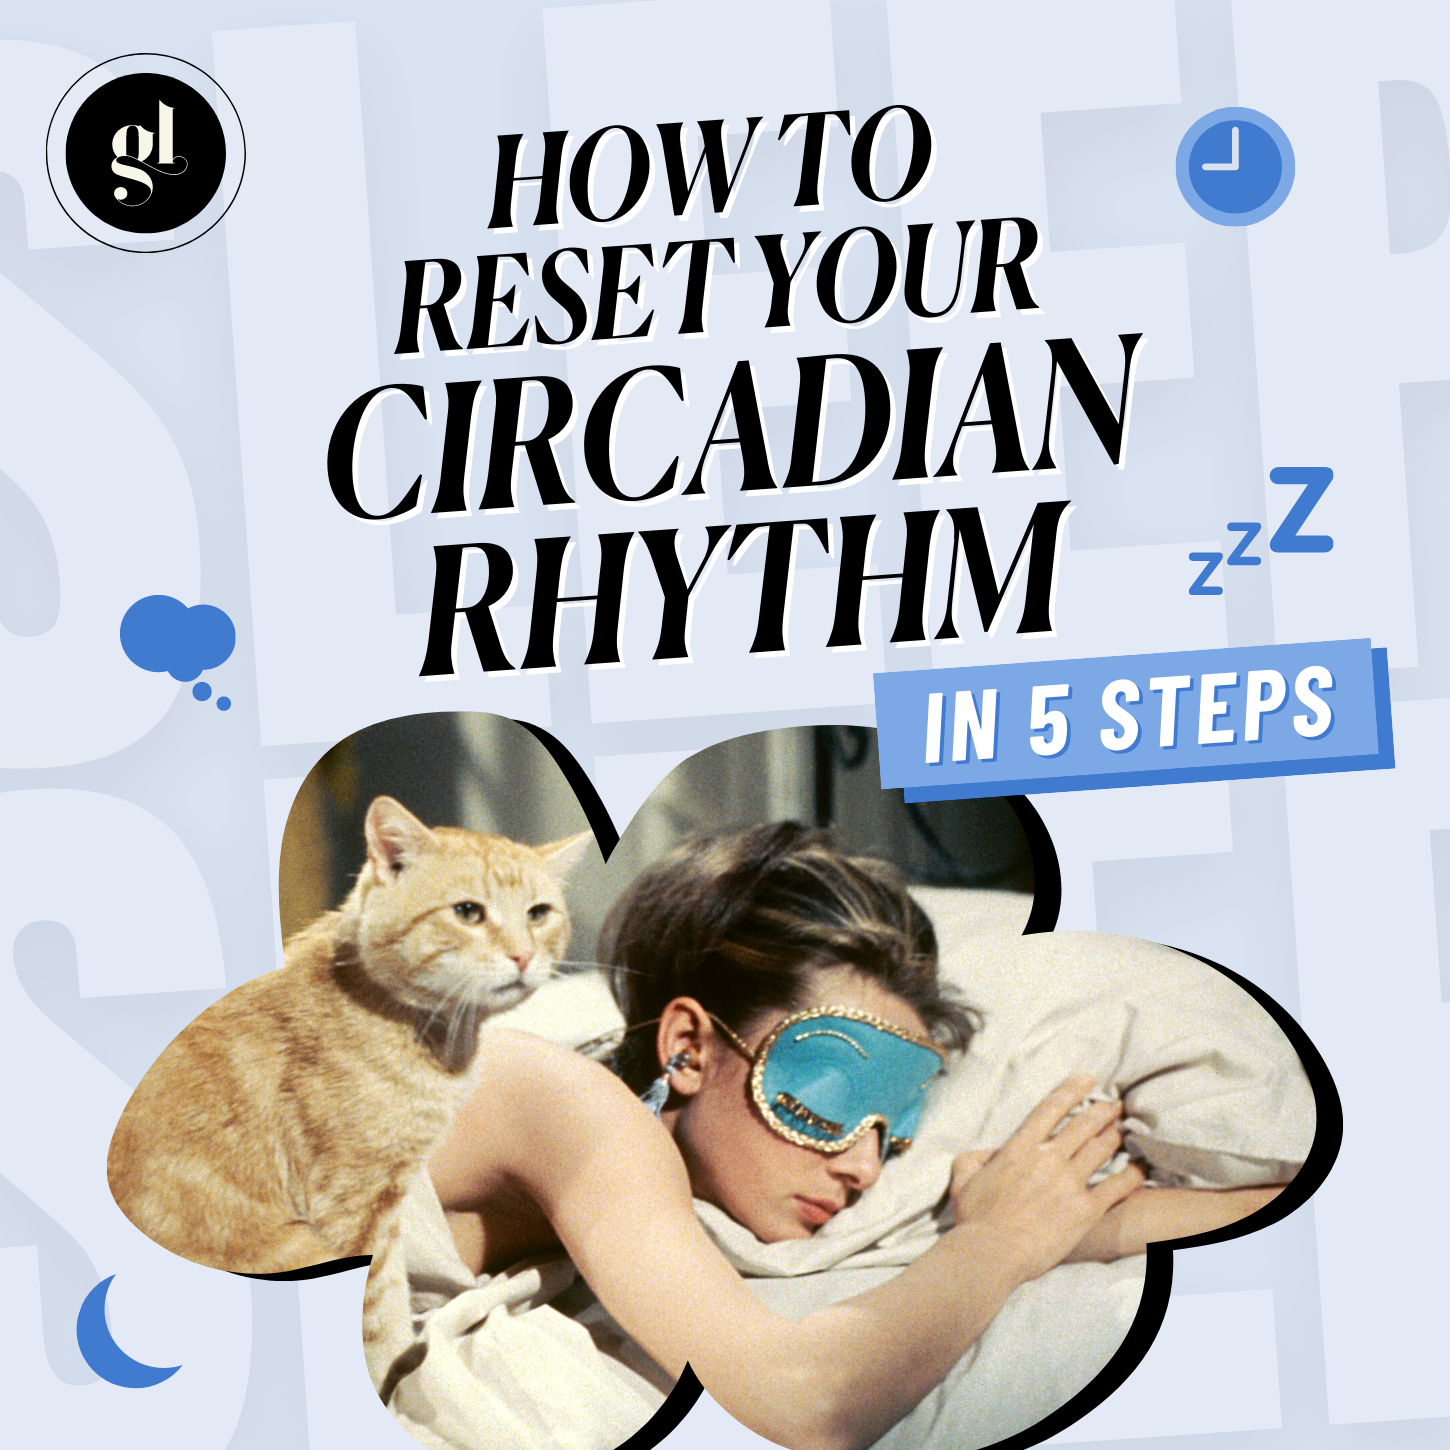 How to Reset Your Circadian Rhythm In 5 Steps